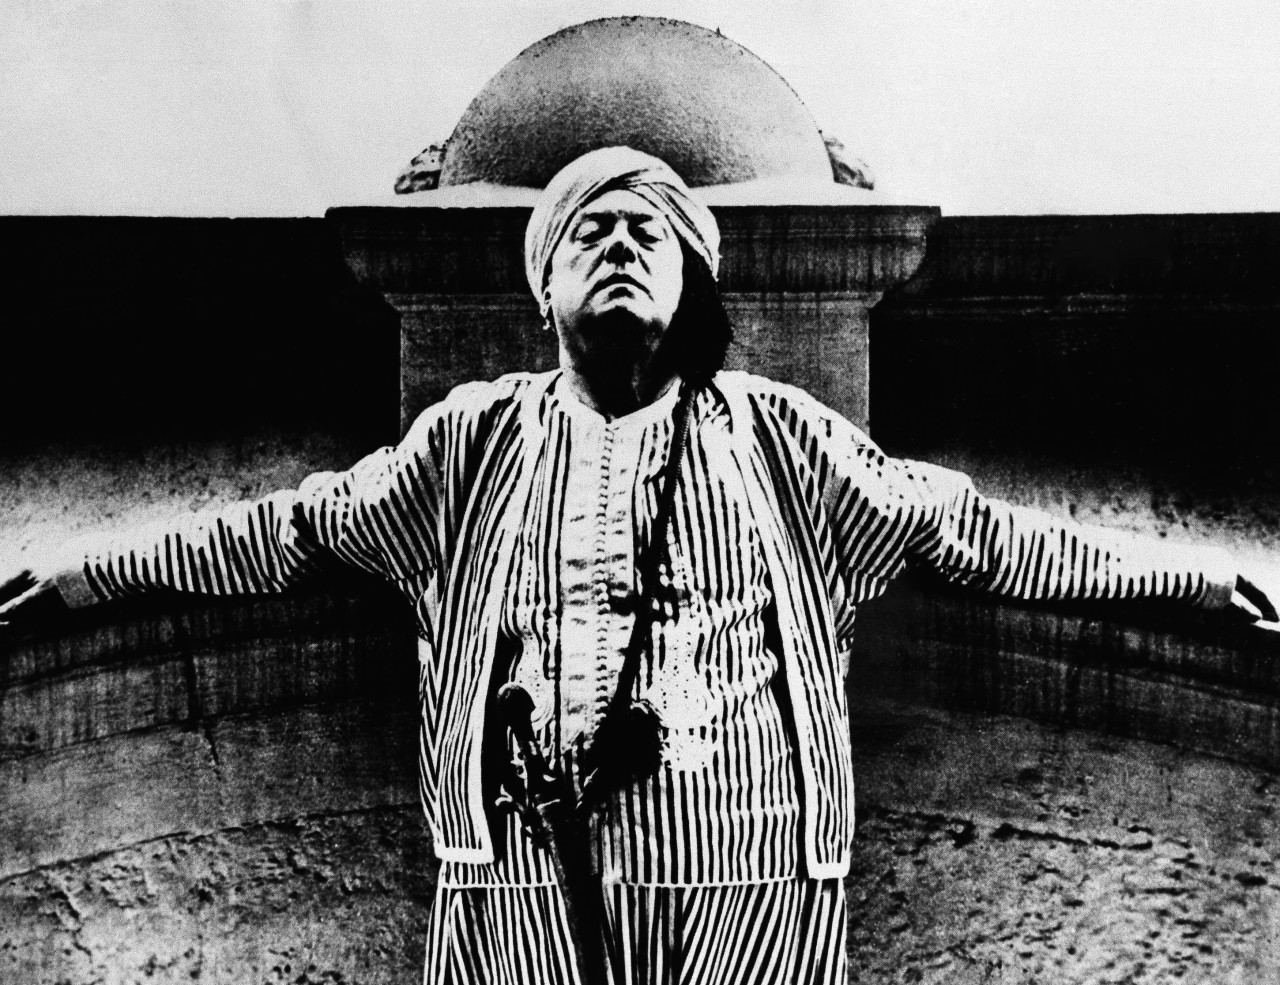 Aleister Crowley British occultist, writer, philosopher and mystic dressed in one of his character magical robes, April 19, 1934. (AP)